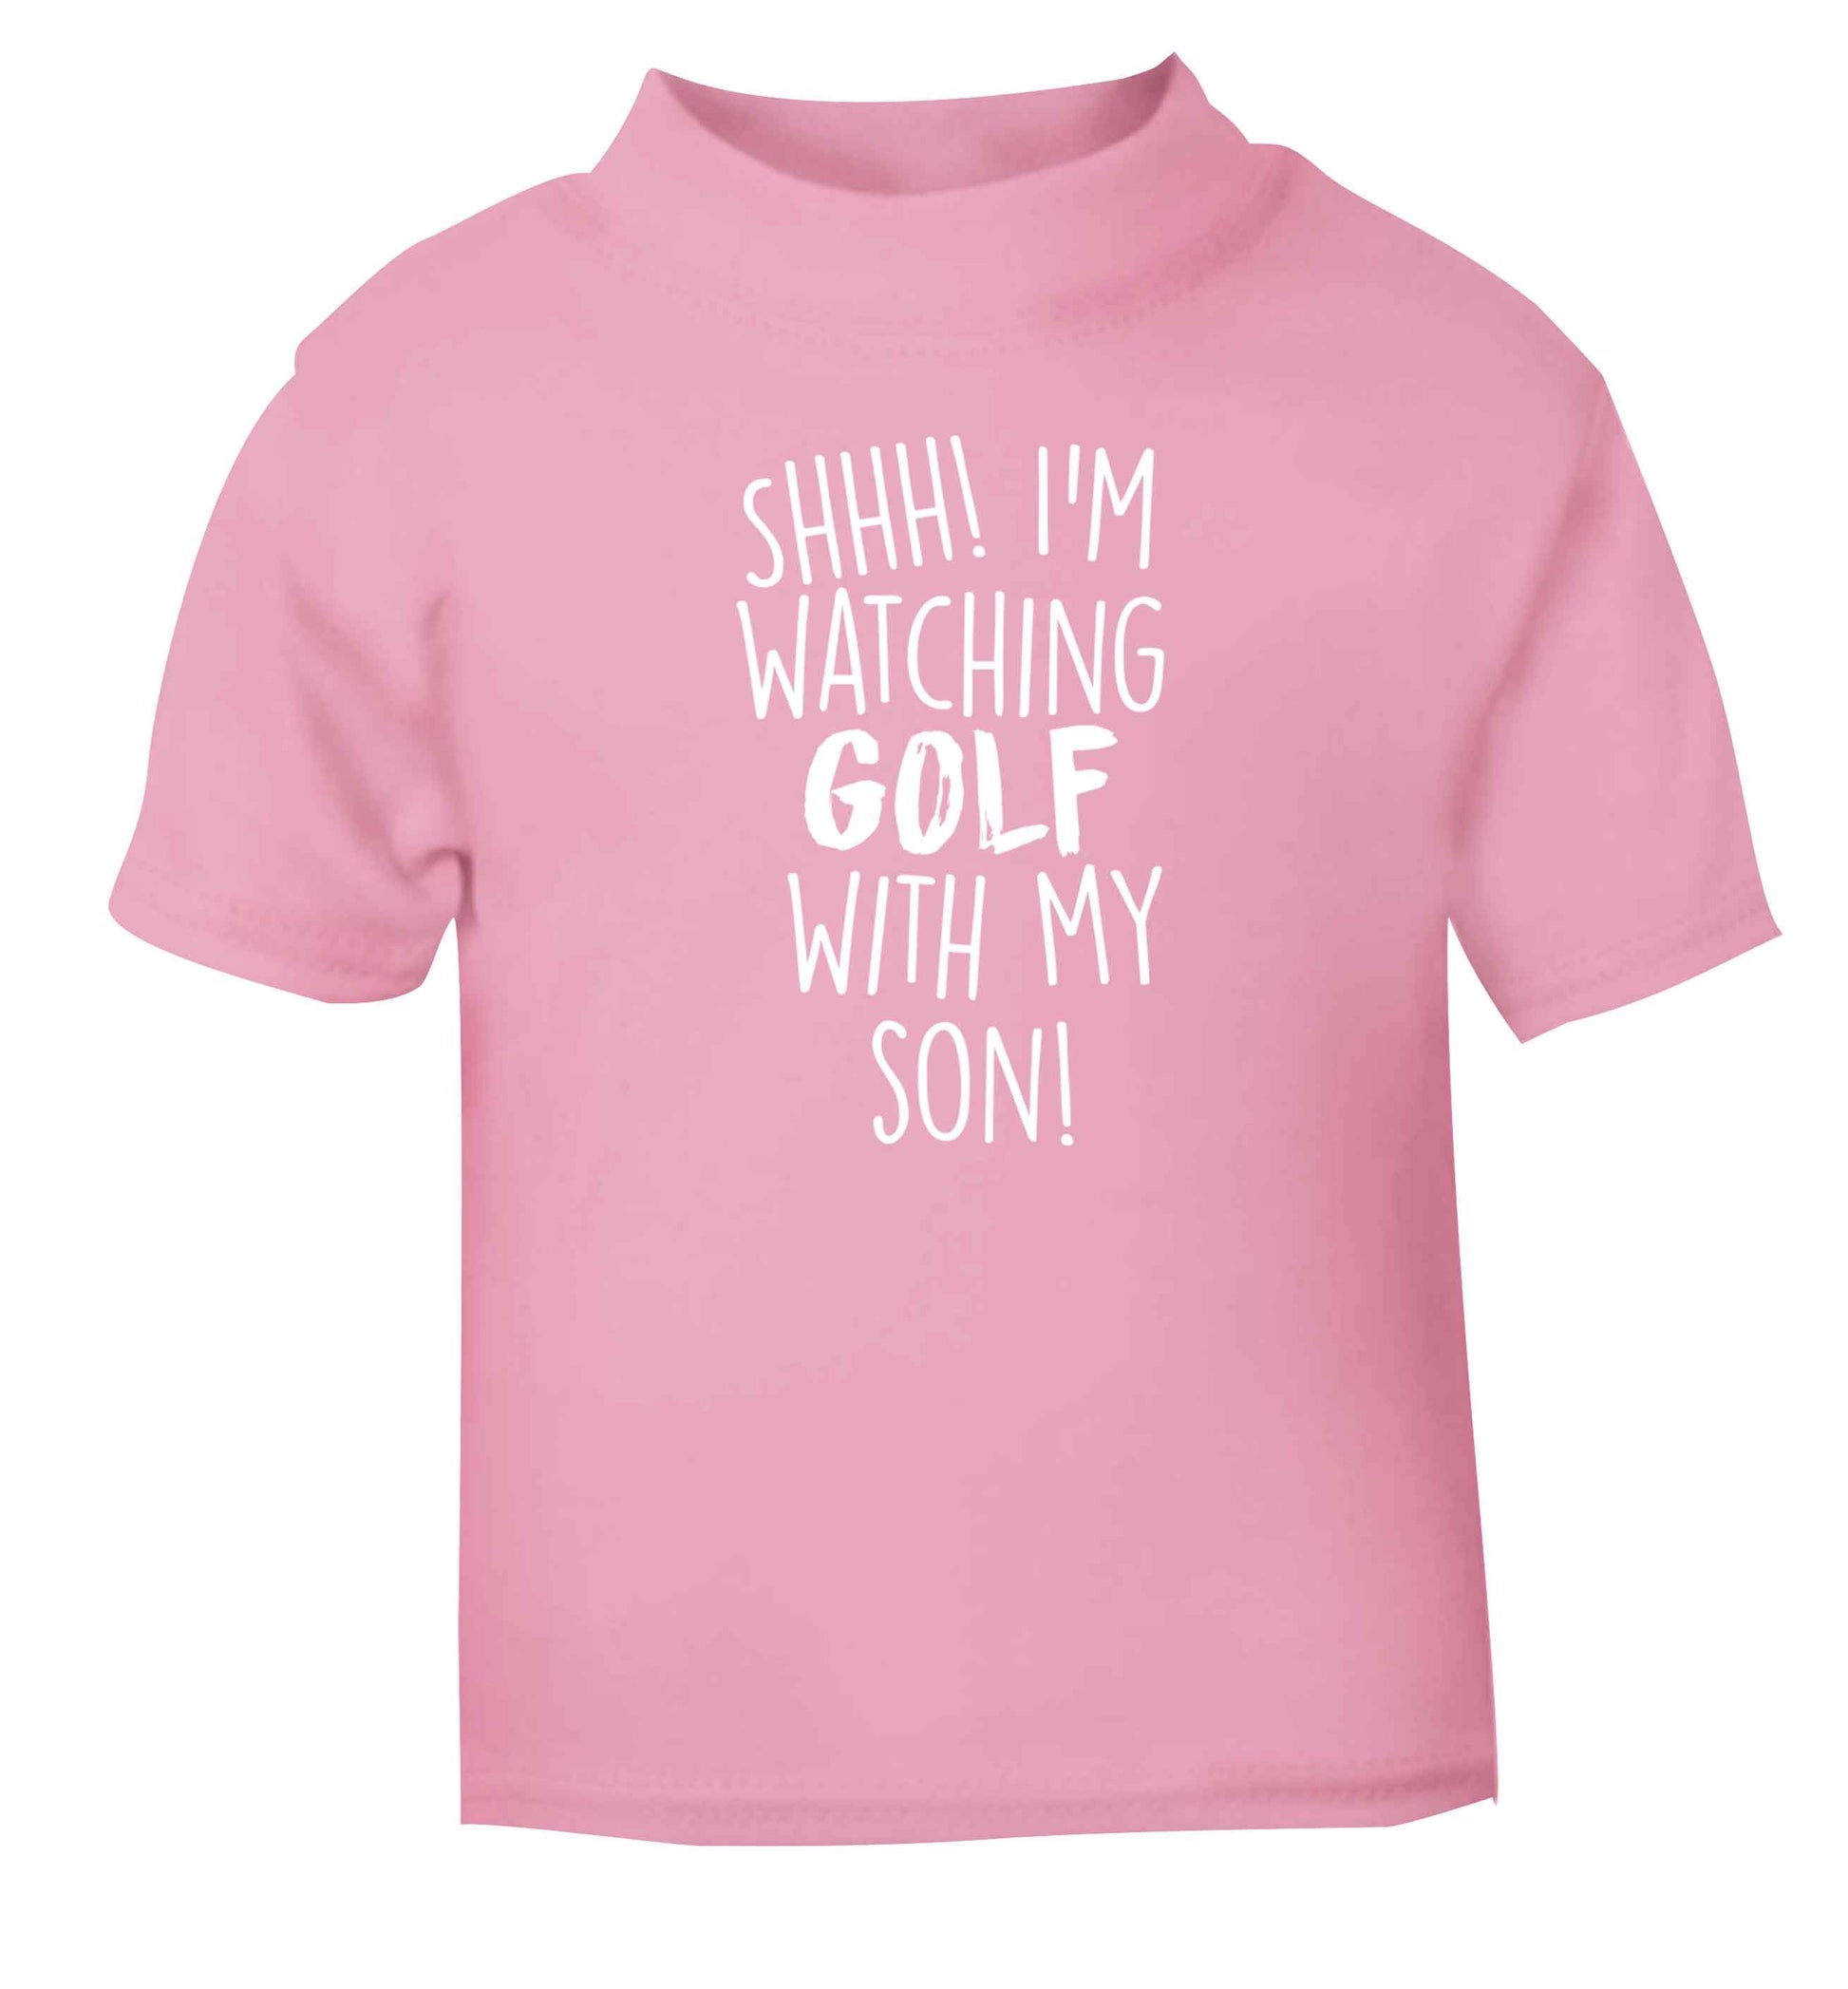 Shh I'm watching golf with my son light pink Baby Toddler Tshirt 2 Years